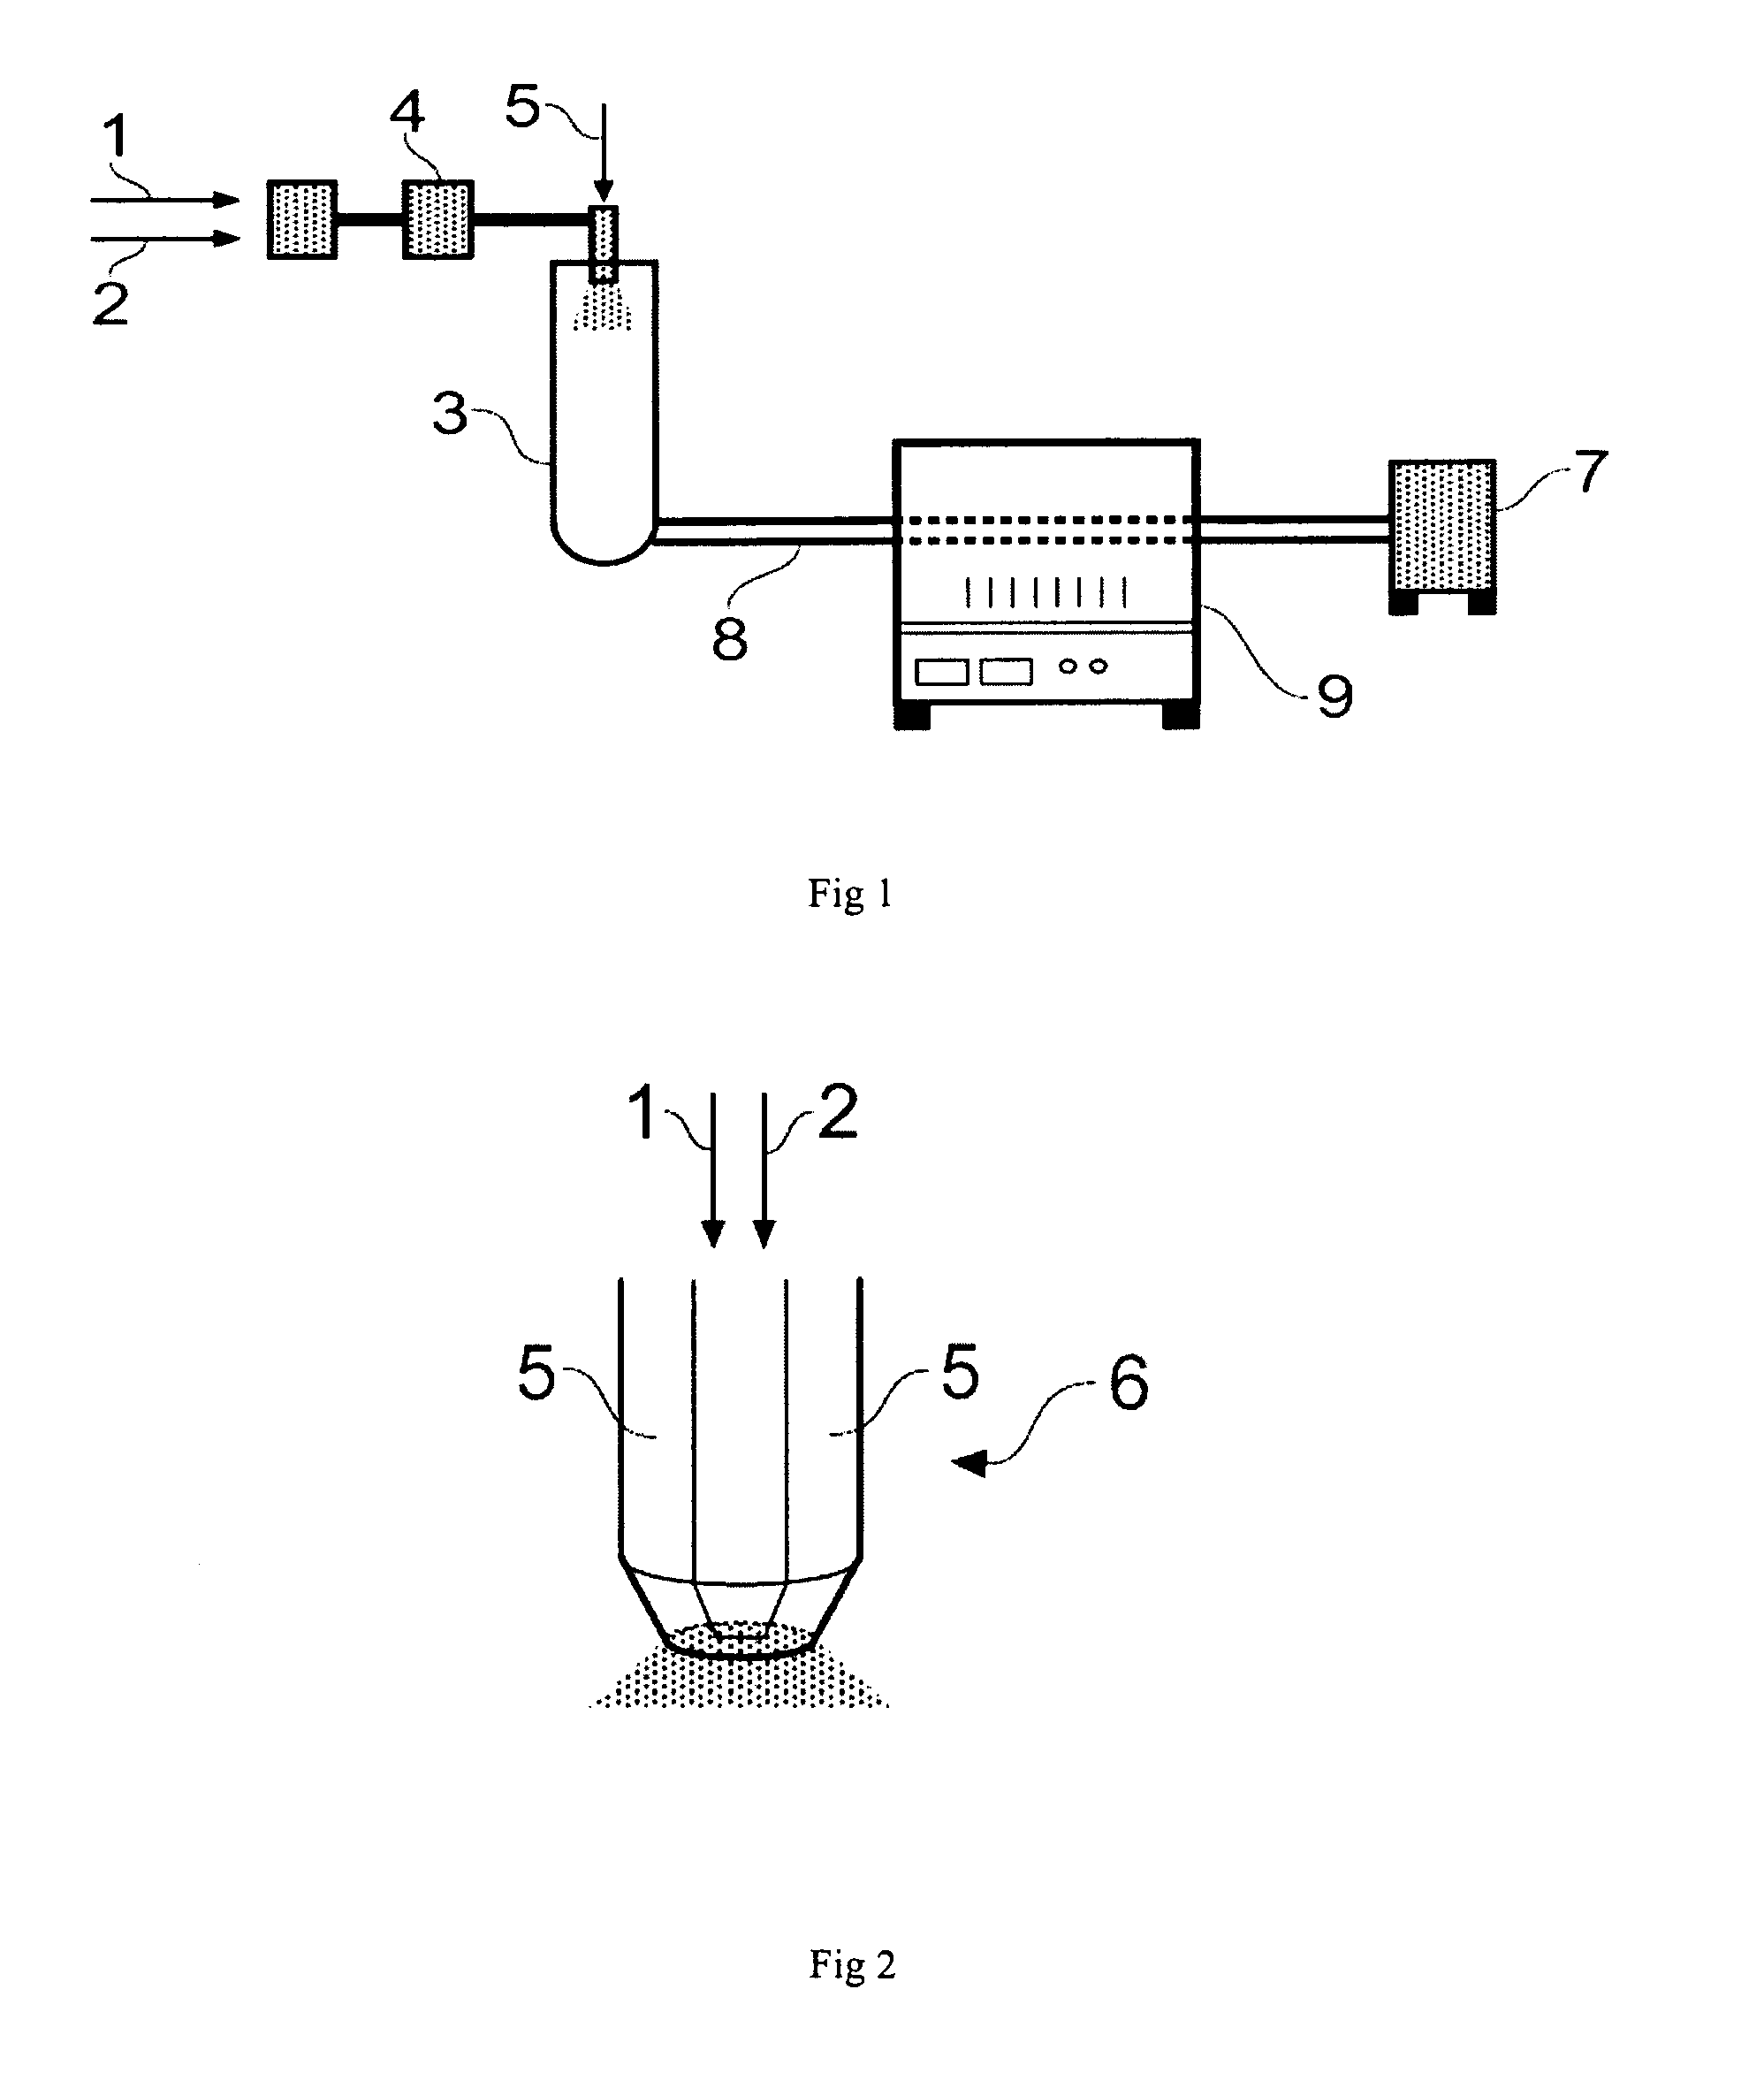 Compositions comprising dye-loaded particles